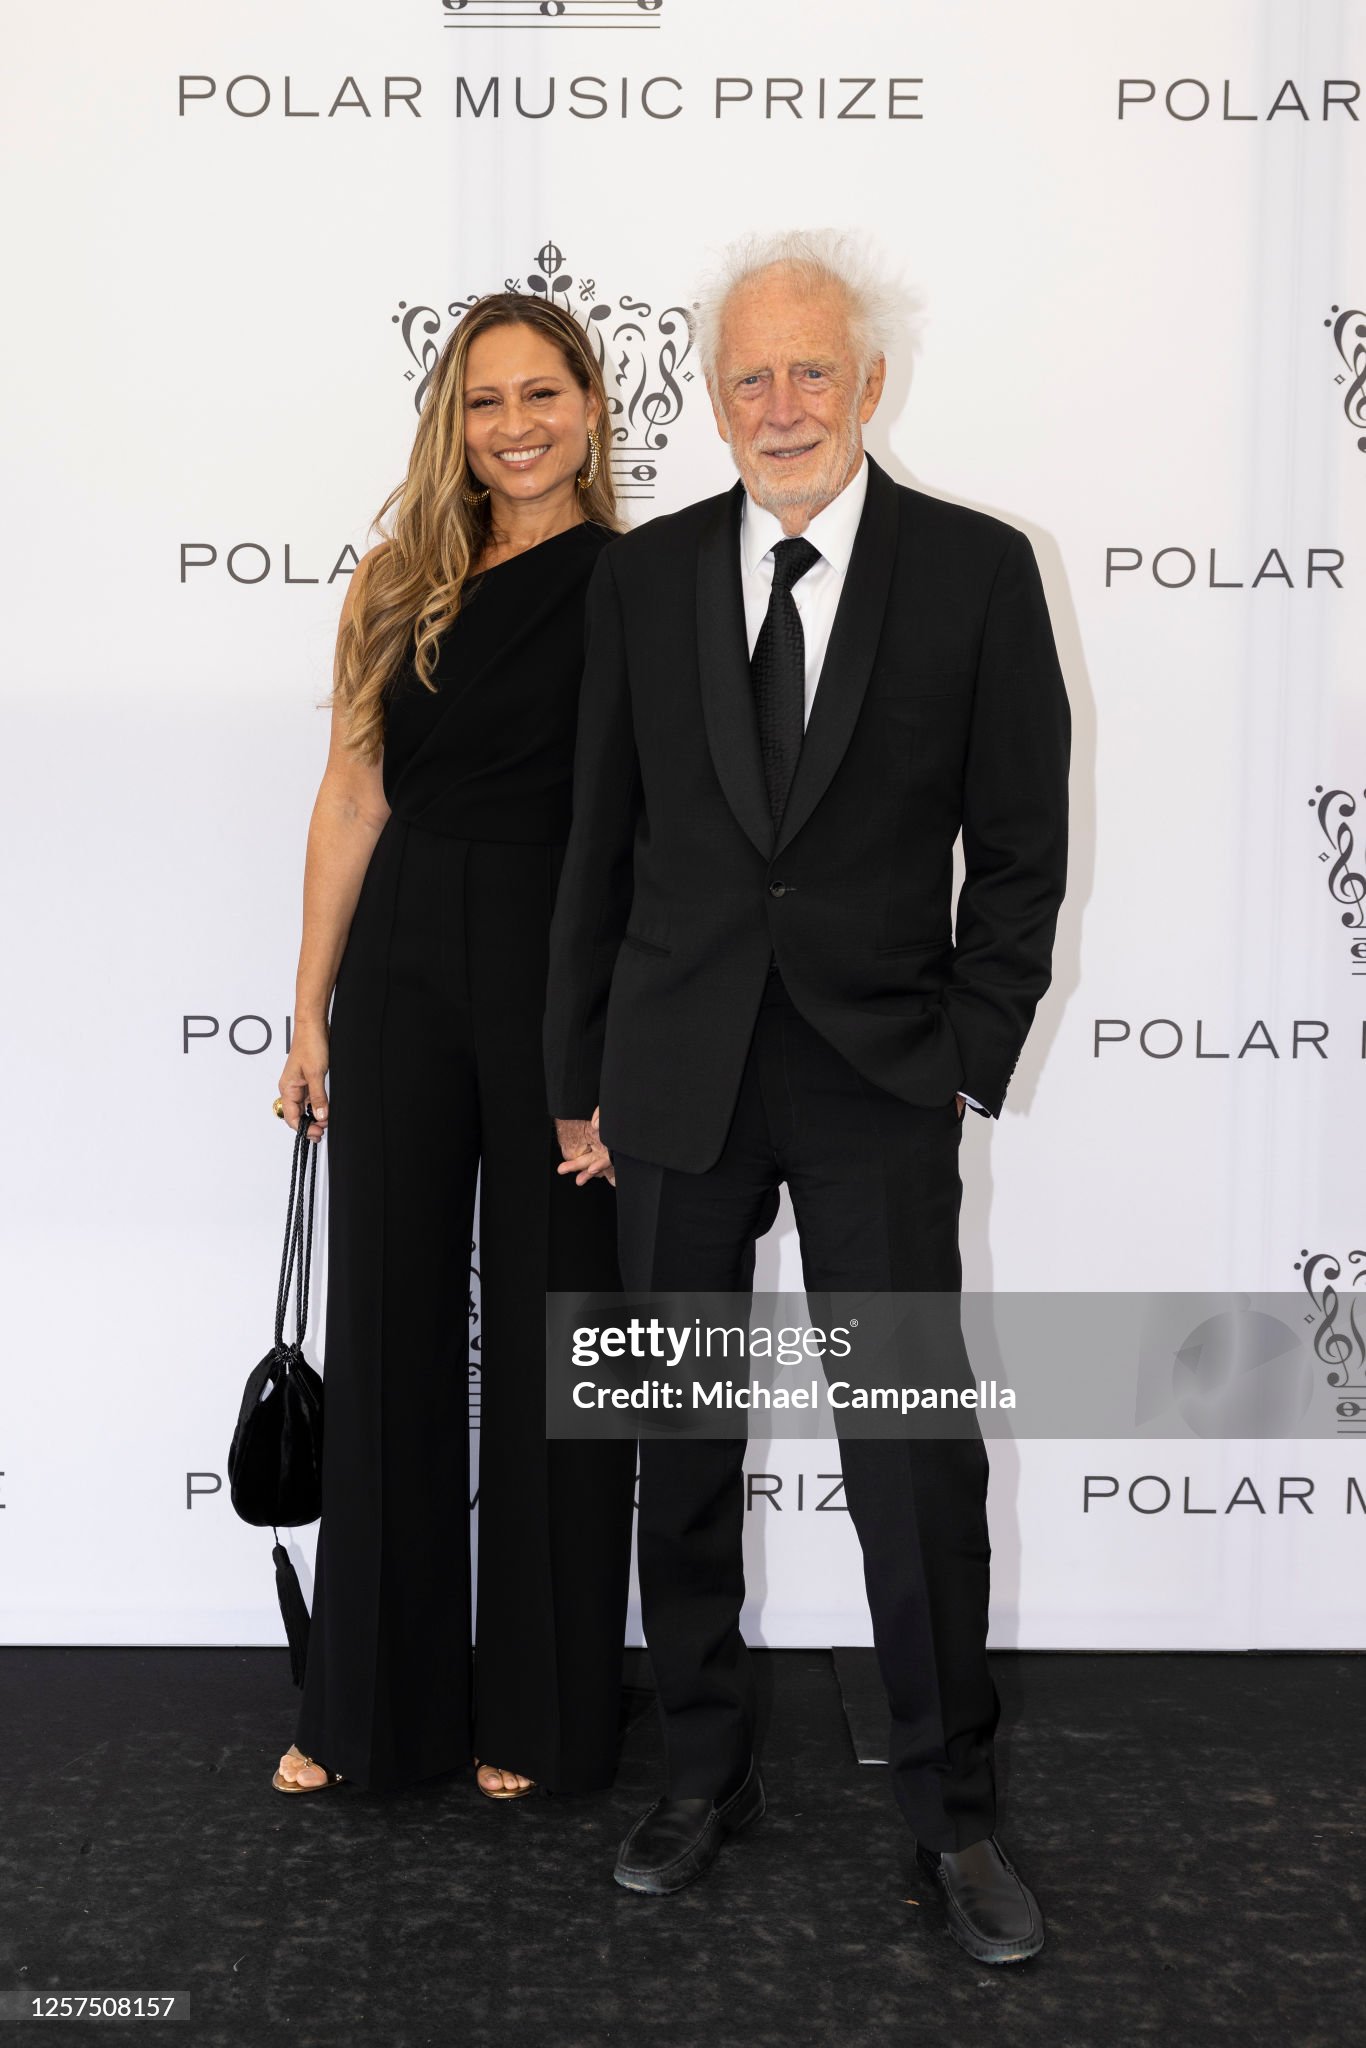 chris-blackwell-2023-polar-prize-laureate-attends-the-polar-music-prize-2023-on-may-23-2023-in.jpg